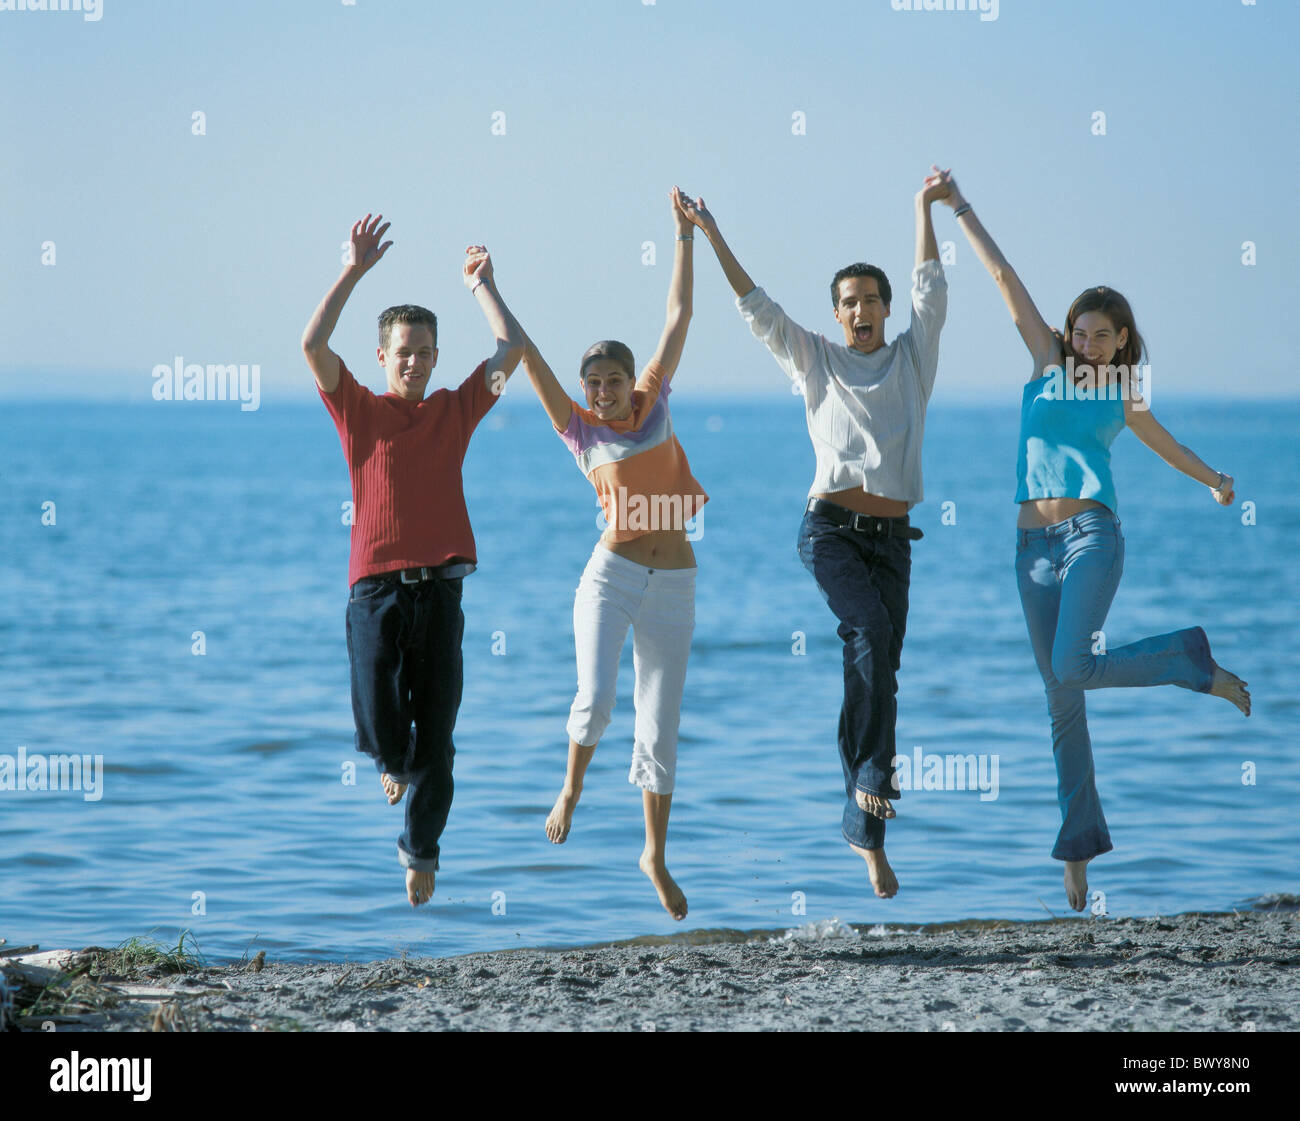 beach couples group high jumping hochspringen jump lake Laughing outside seashore shore teenagers Two p Stock Photo